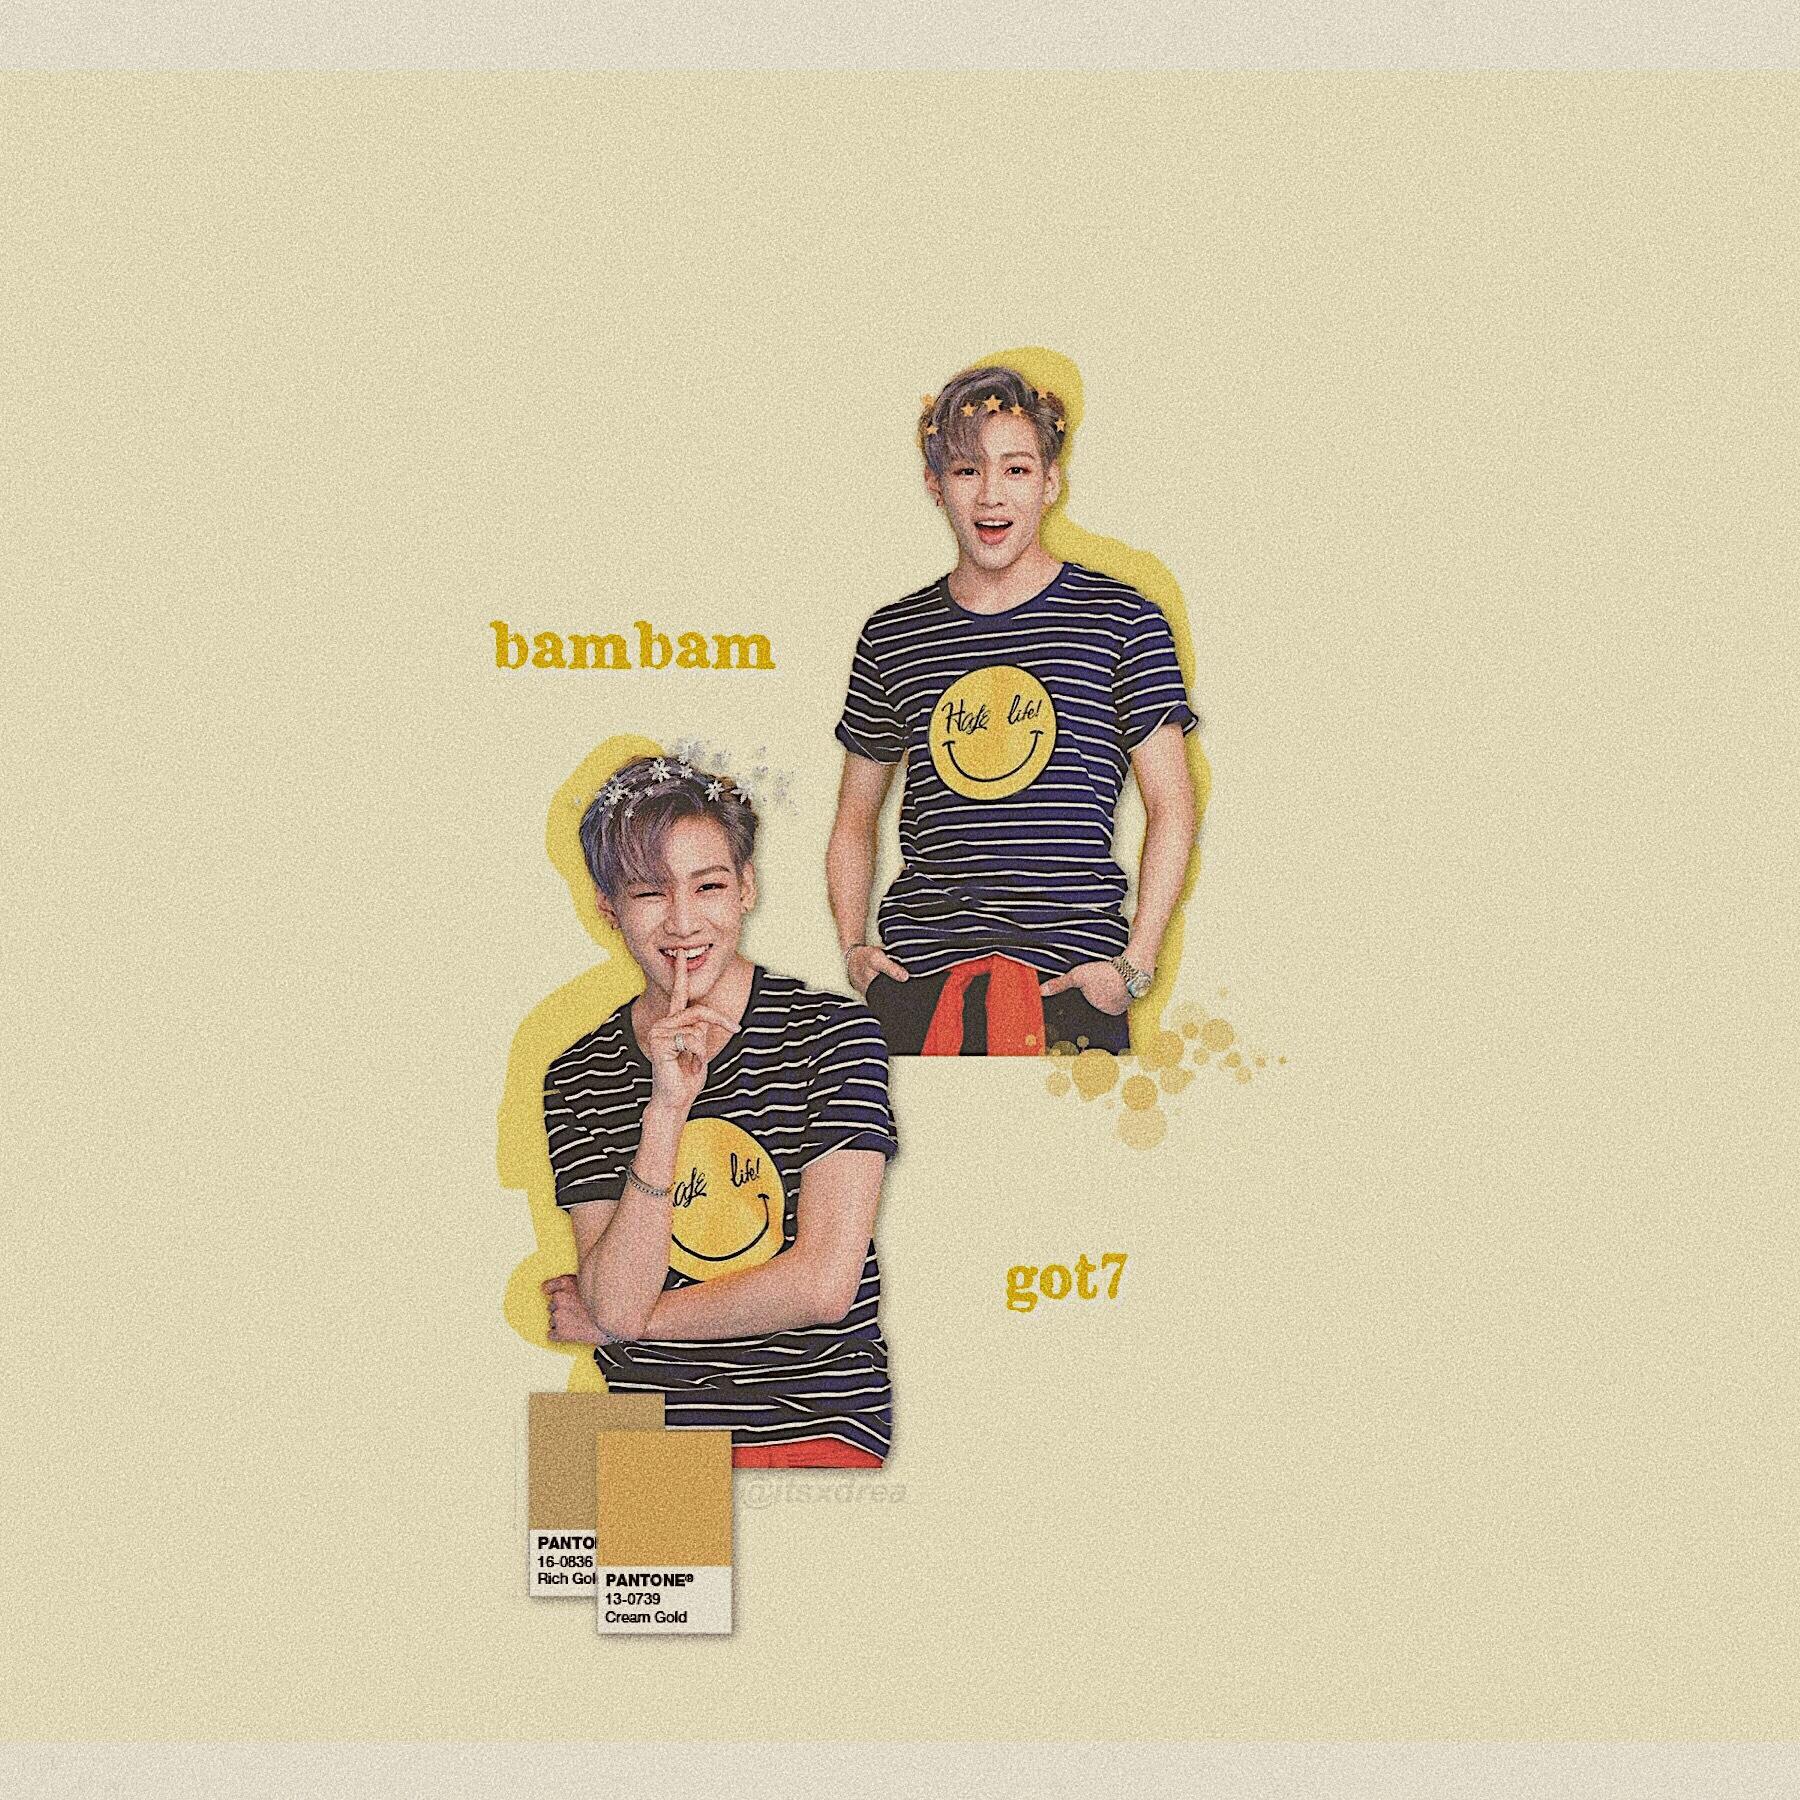 🌼
• bambam // got7 •
> edit request for @POS1T1VE_V1BES <
hope you like it !!
i’m RLLY sry there isn’t a lot of red, i just thought these photos looked rlly good with the edit ://
>> i don’t rlly stan got7 but I LOVE watching interviews w/ them bc they’re